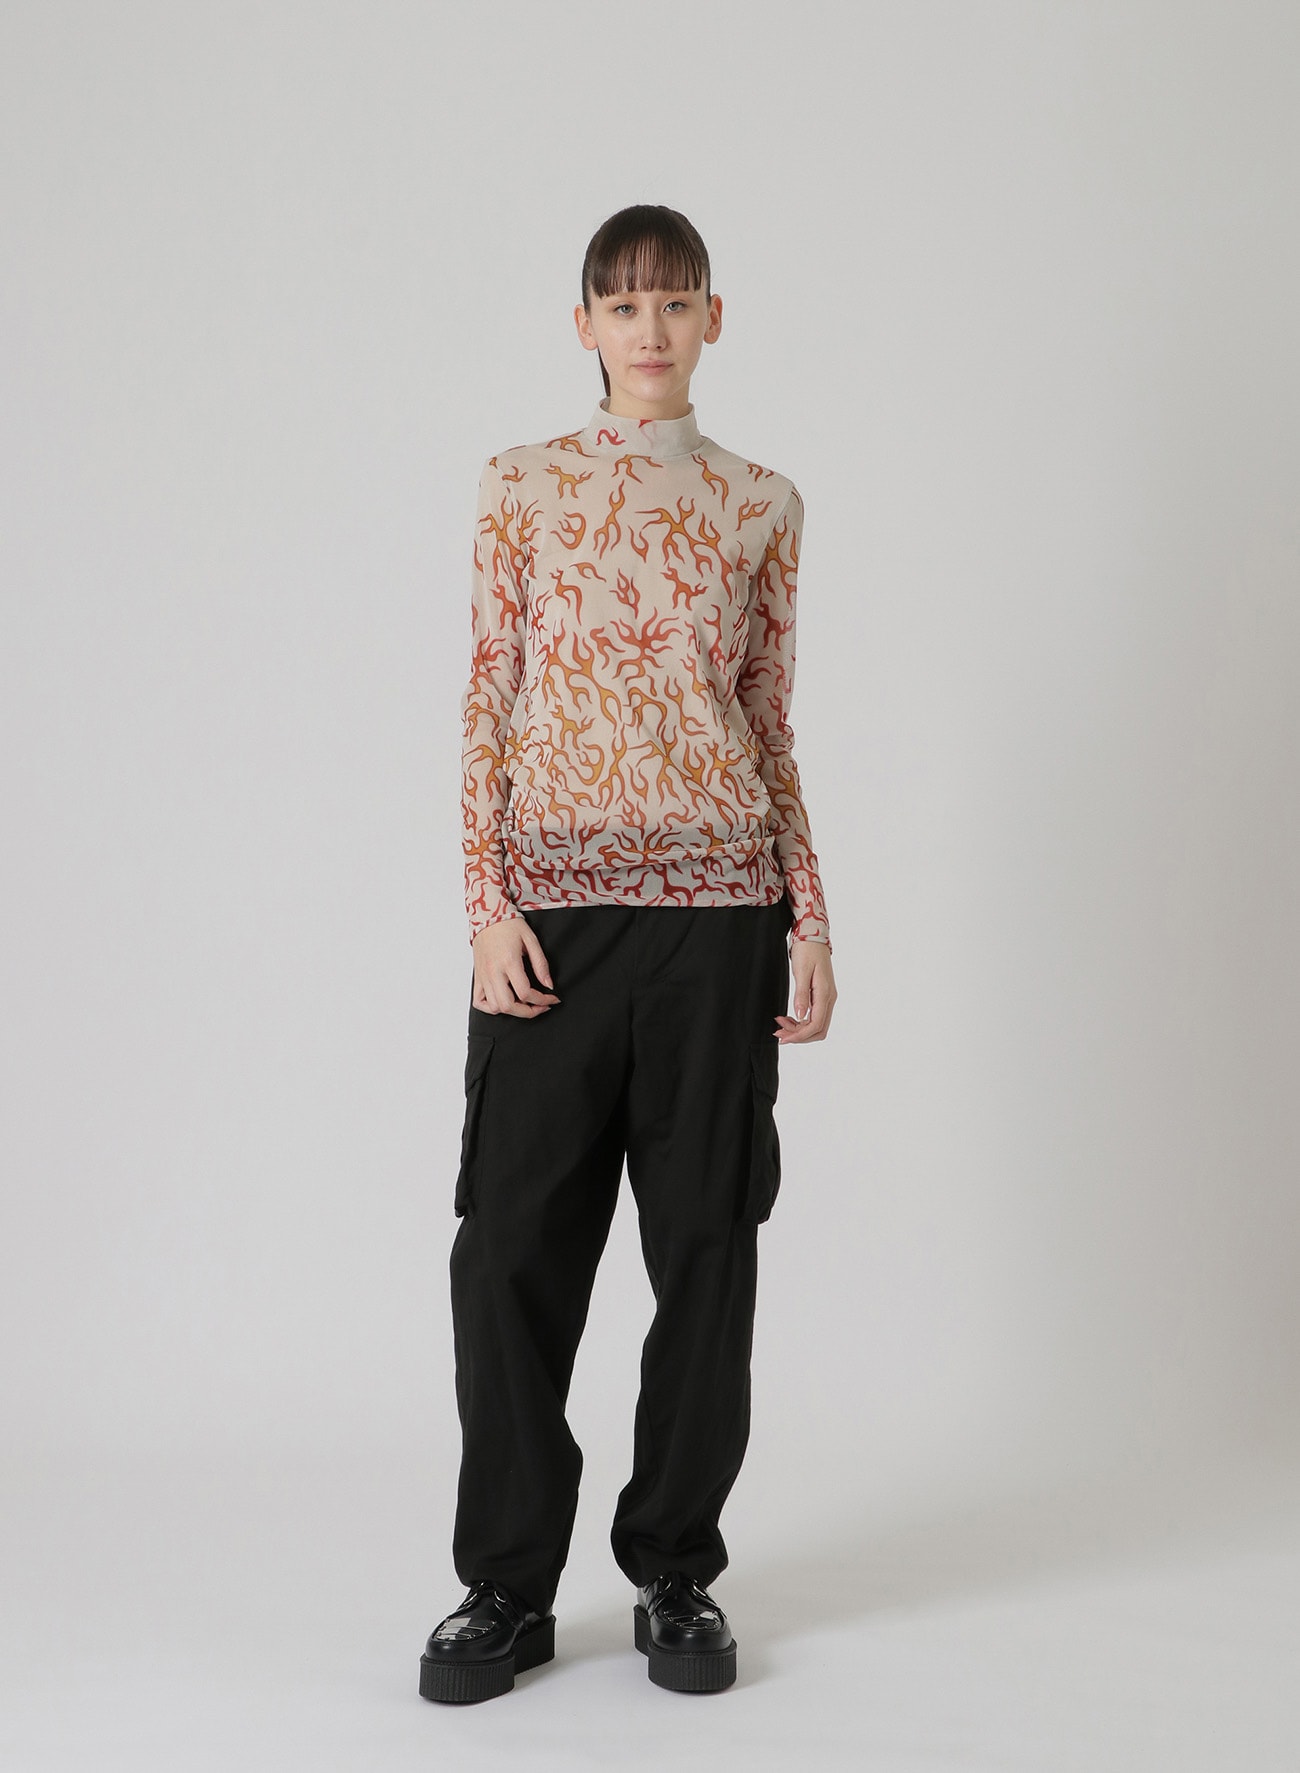 FIRE PRINT TOP WITH MOCK TURTLENECK